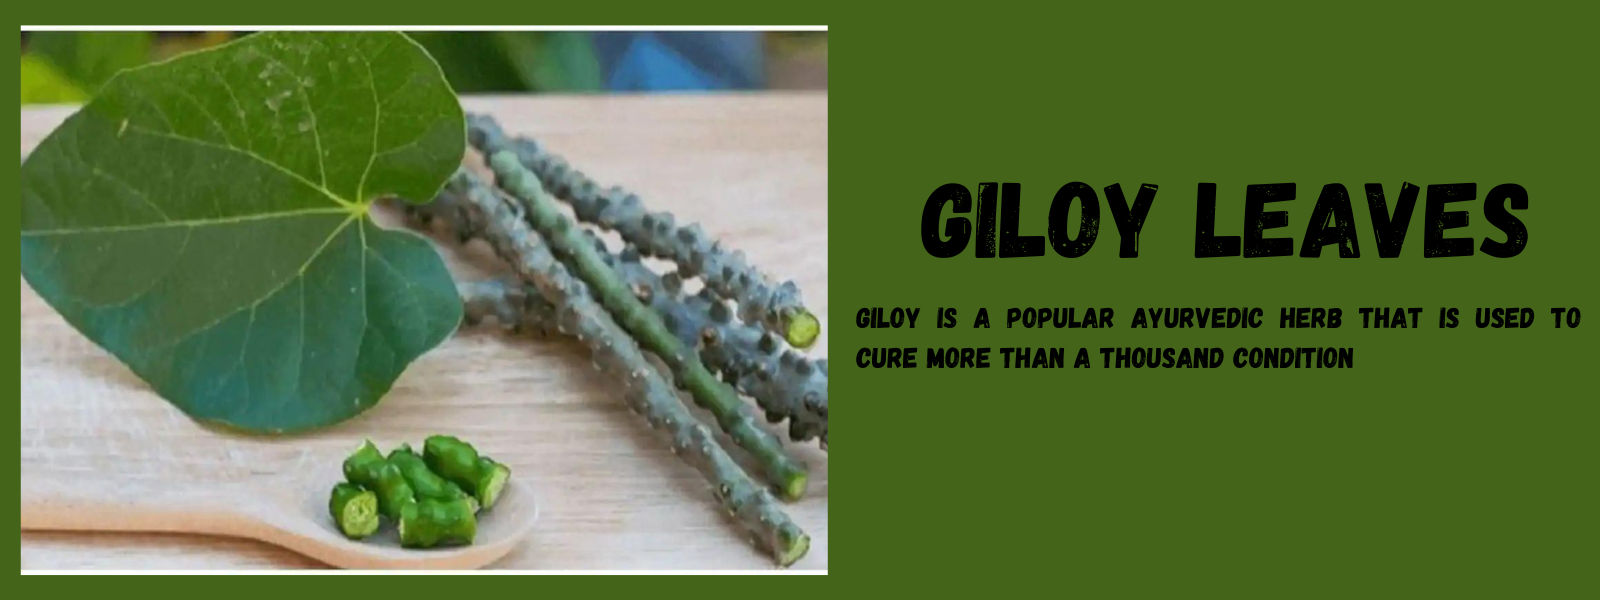 Giloy Leaves- Health Benefits, Uses and Important Facts